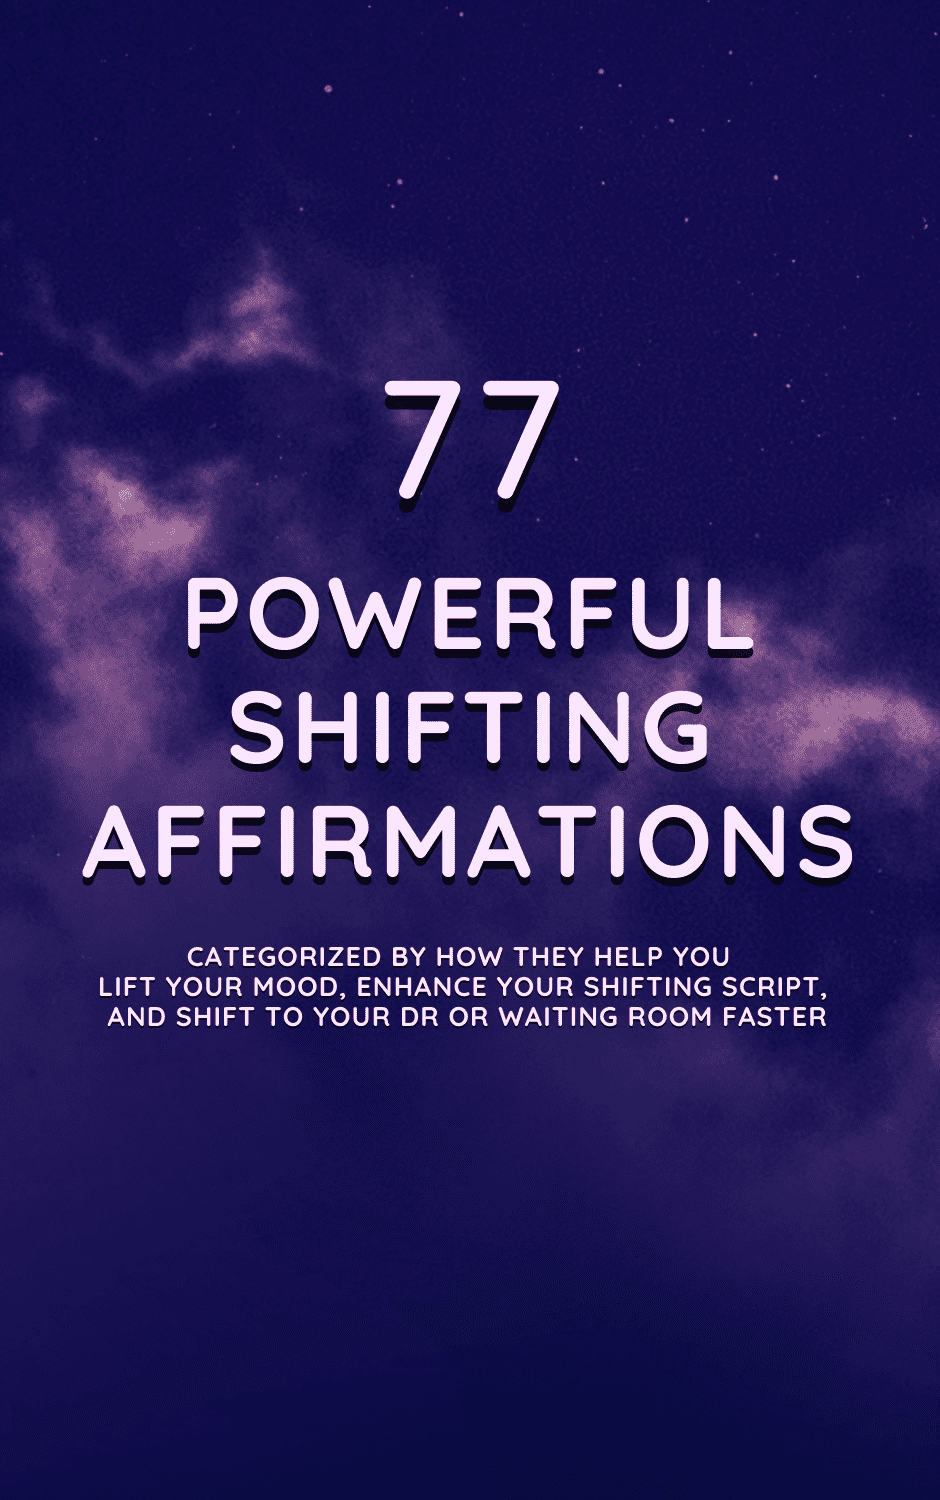 77 Powerful Reality Shifting Affirmations: shift to your DR, be with your comfort character, improve your mood, or go to your waiting room